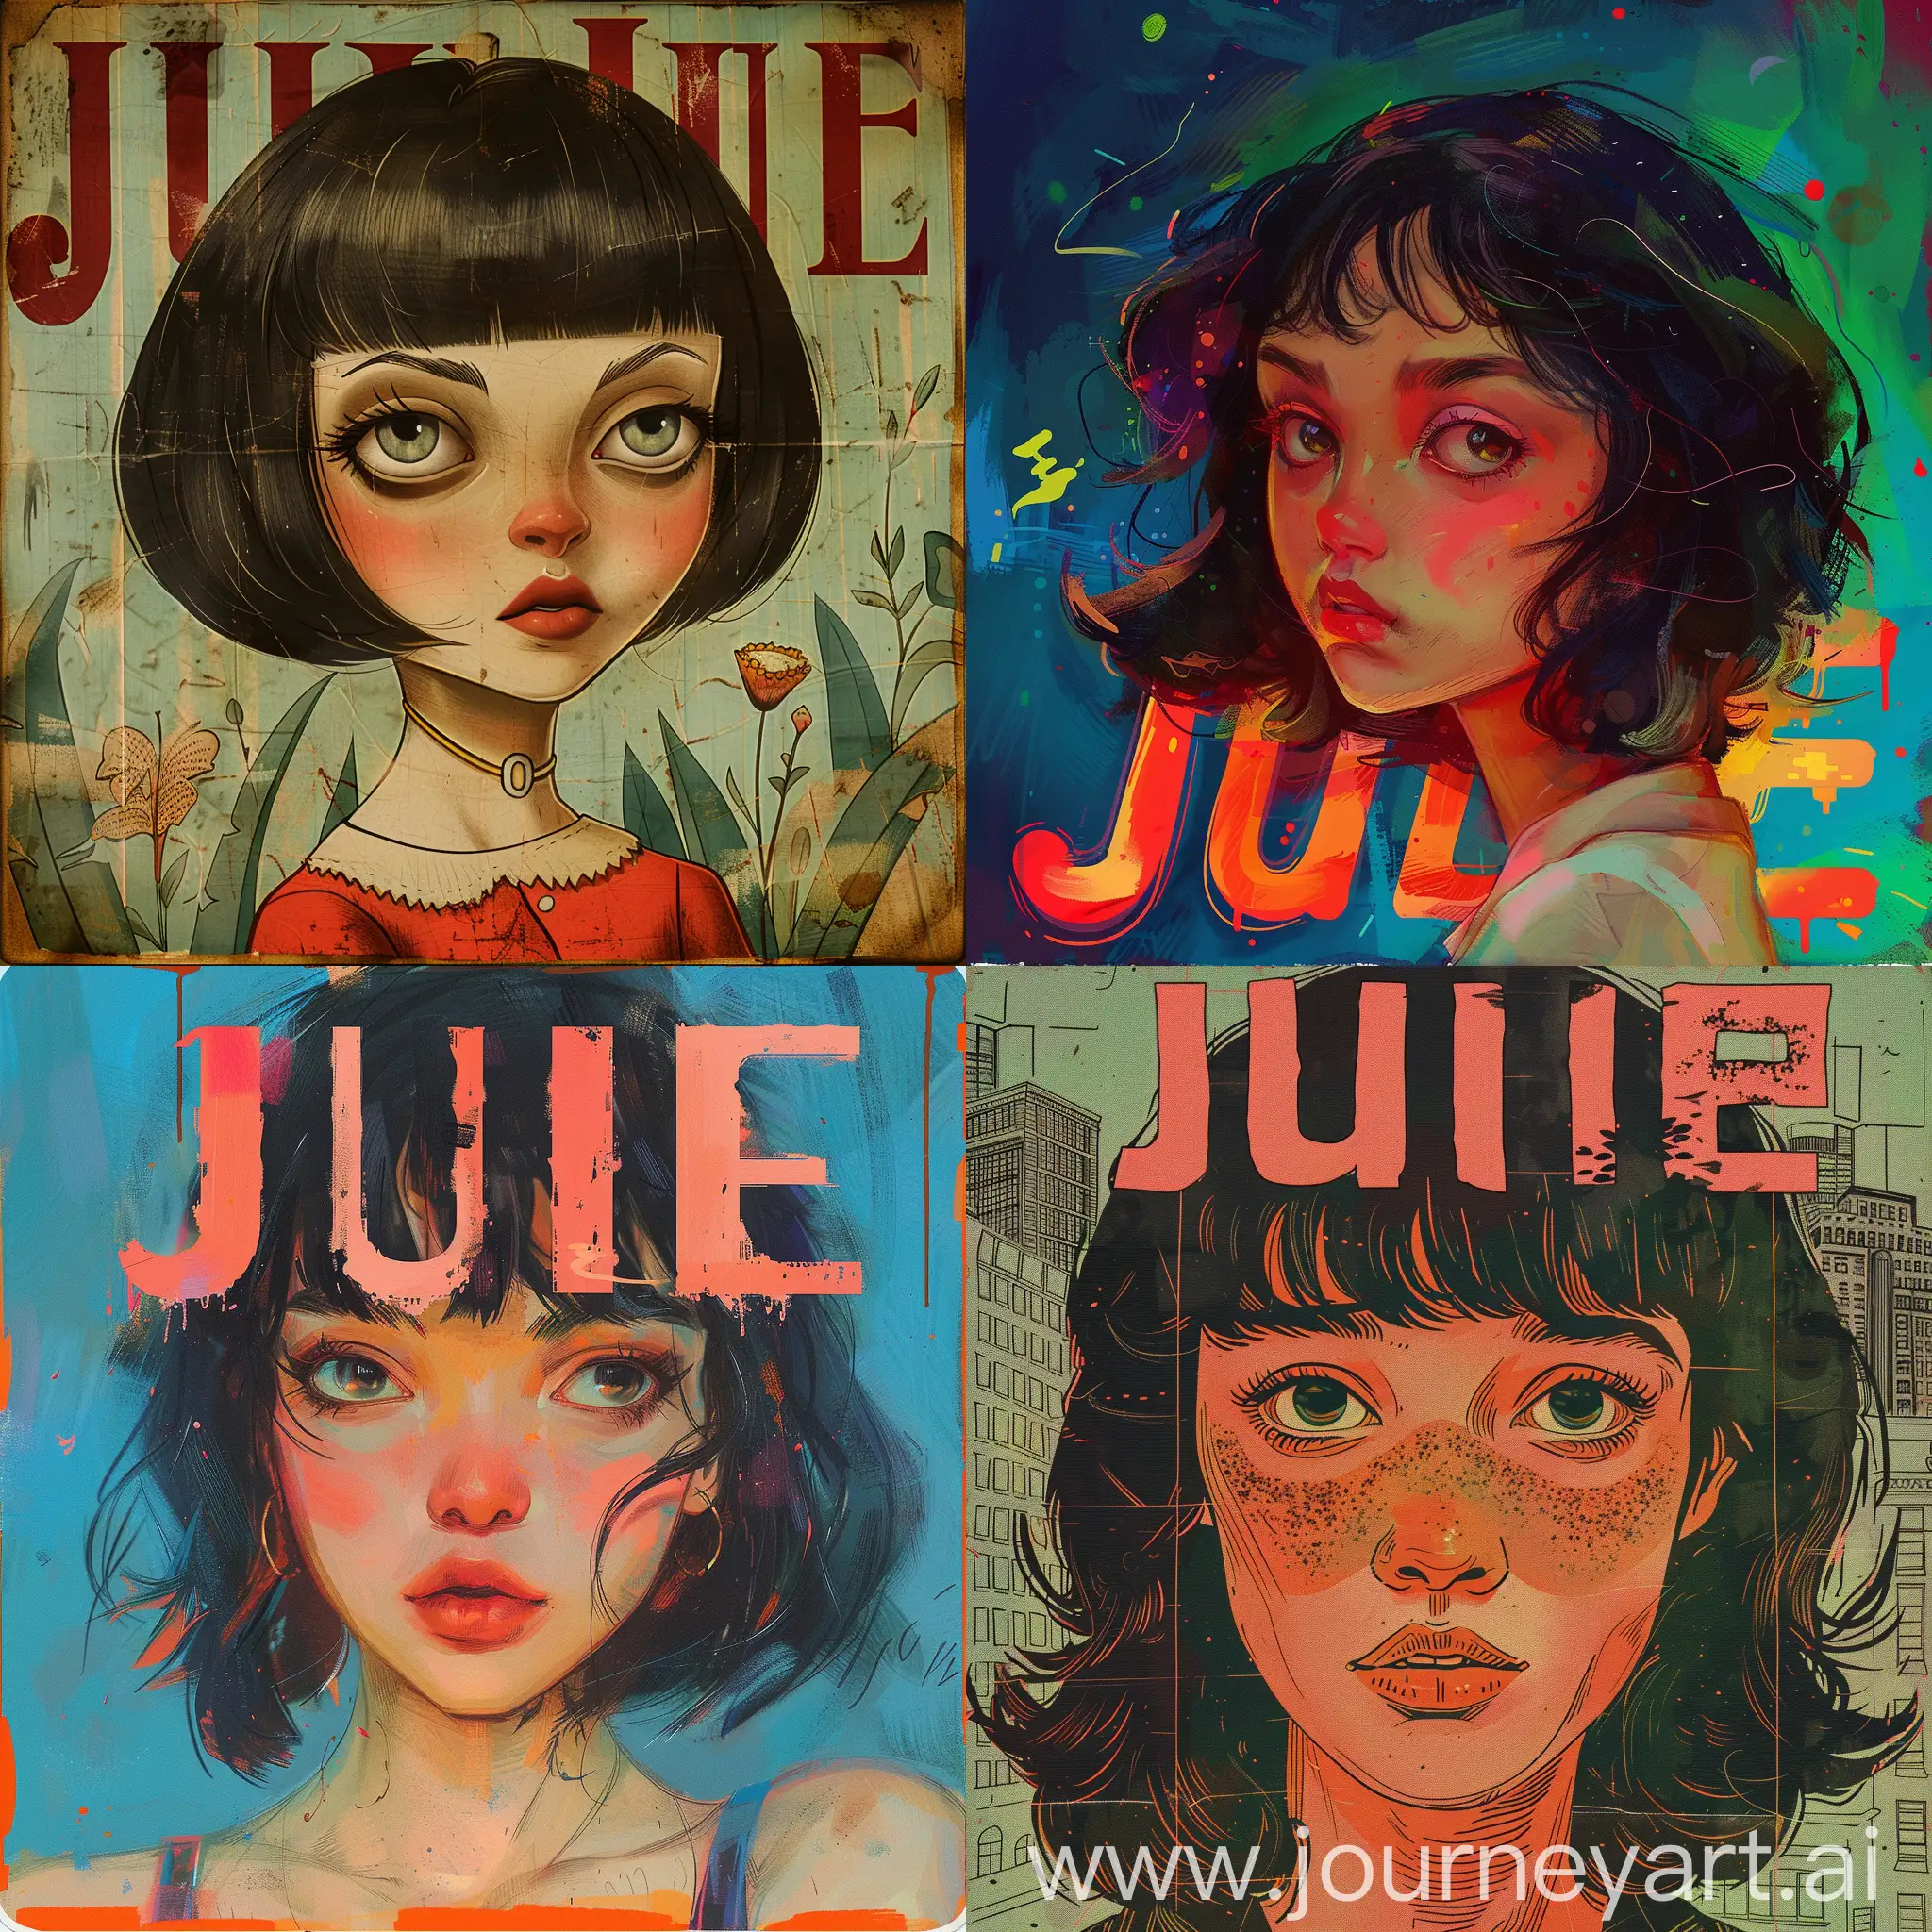 Julieinspired-Character-Art-in-a-Vibrant-Pop-Style